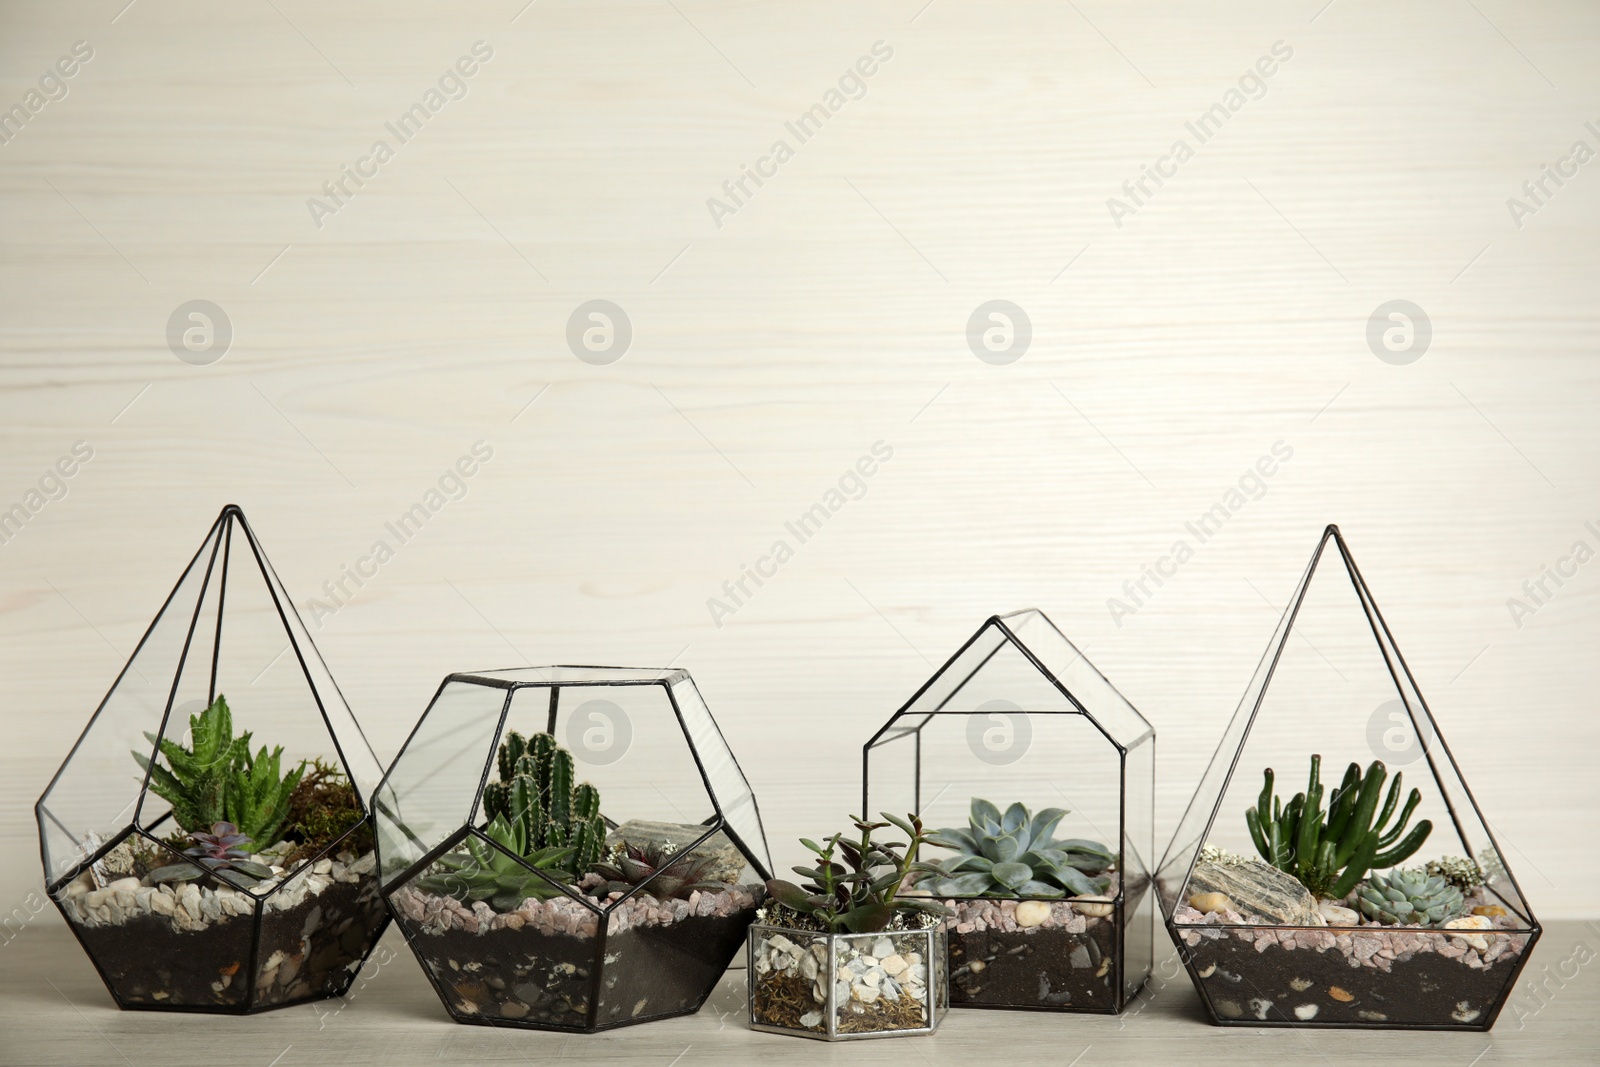 Photo of Different florariums with beautiful succulents on wooden table against white background, space for text